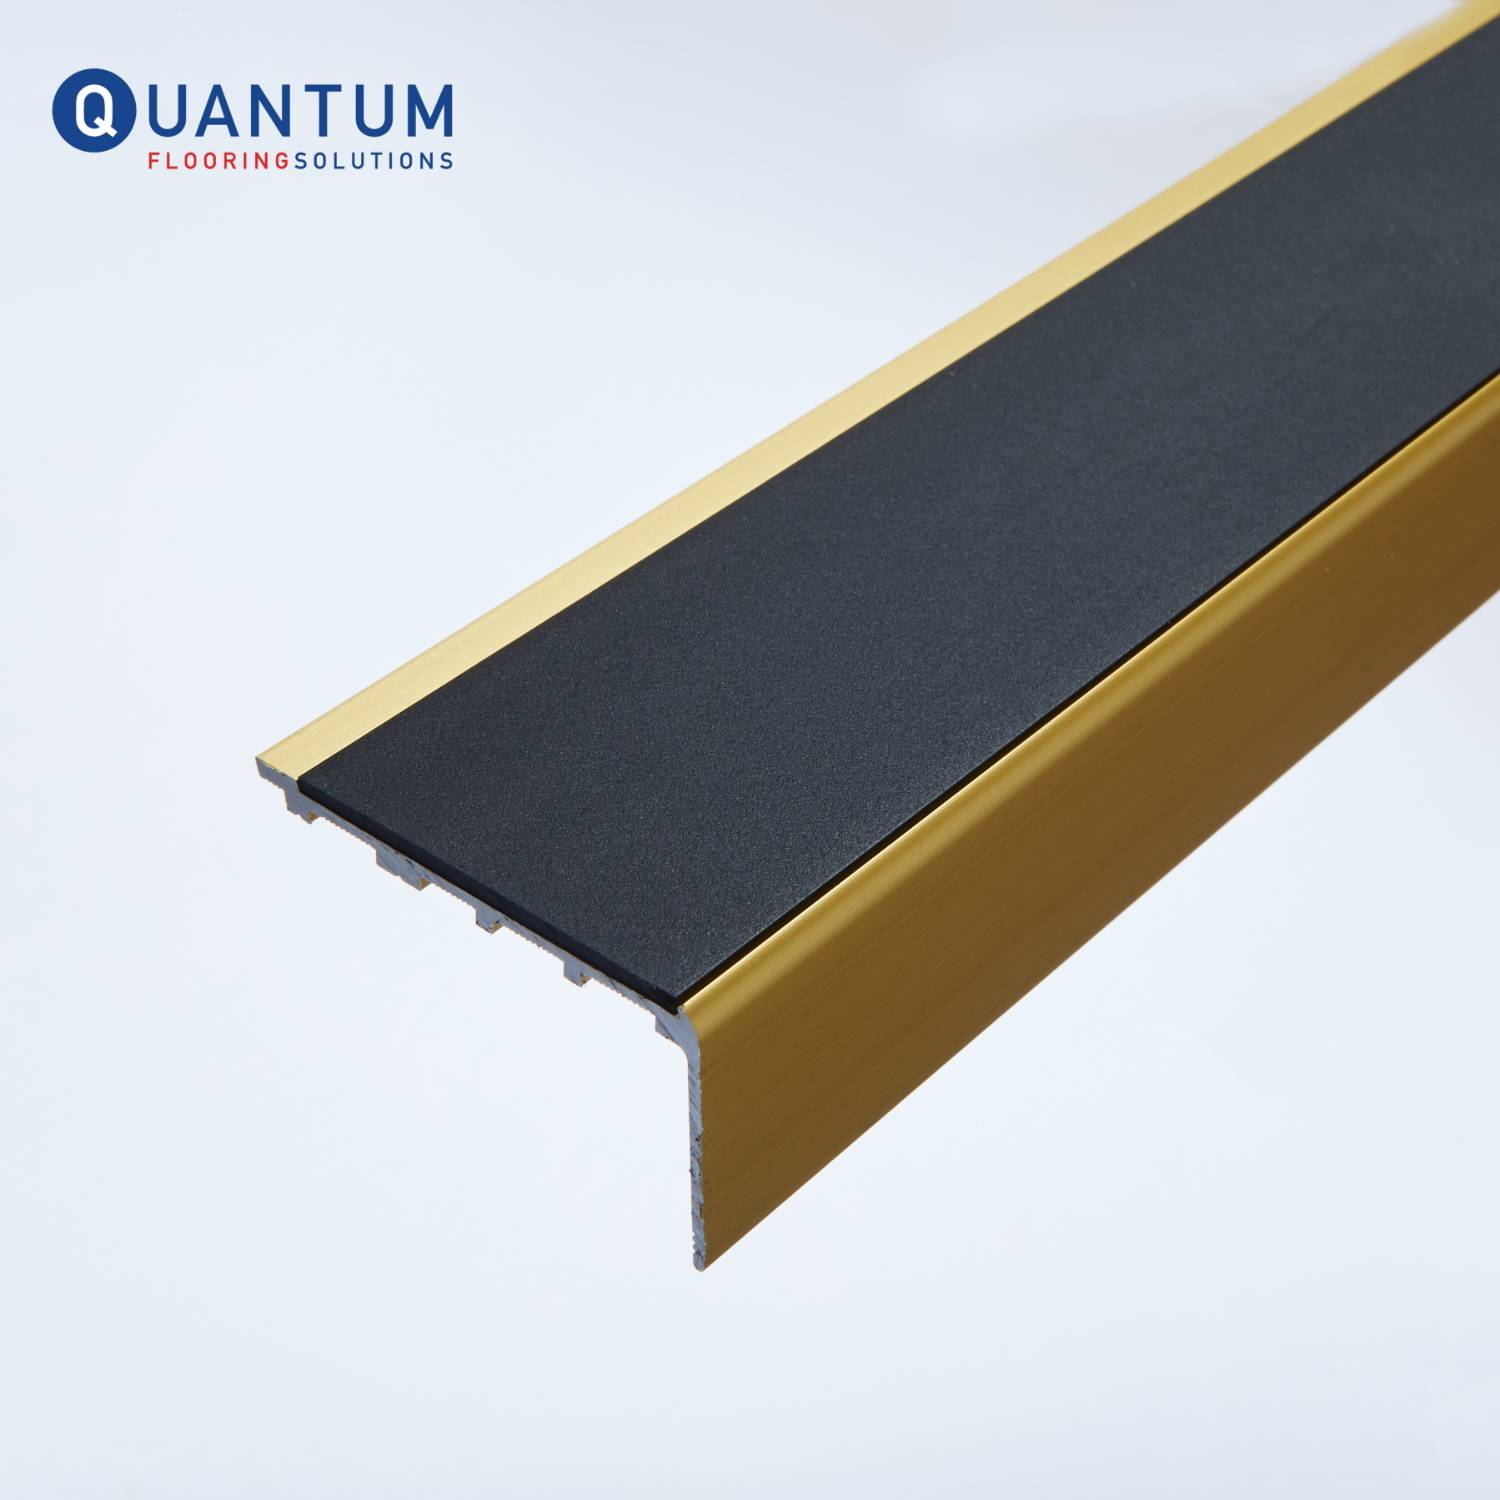 Gold Anodized Stair Nosing/ Stair Edging For Carpet And Carpet Tile